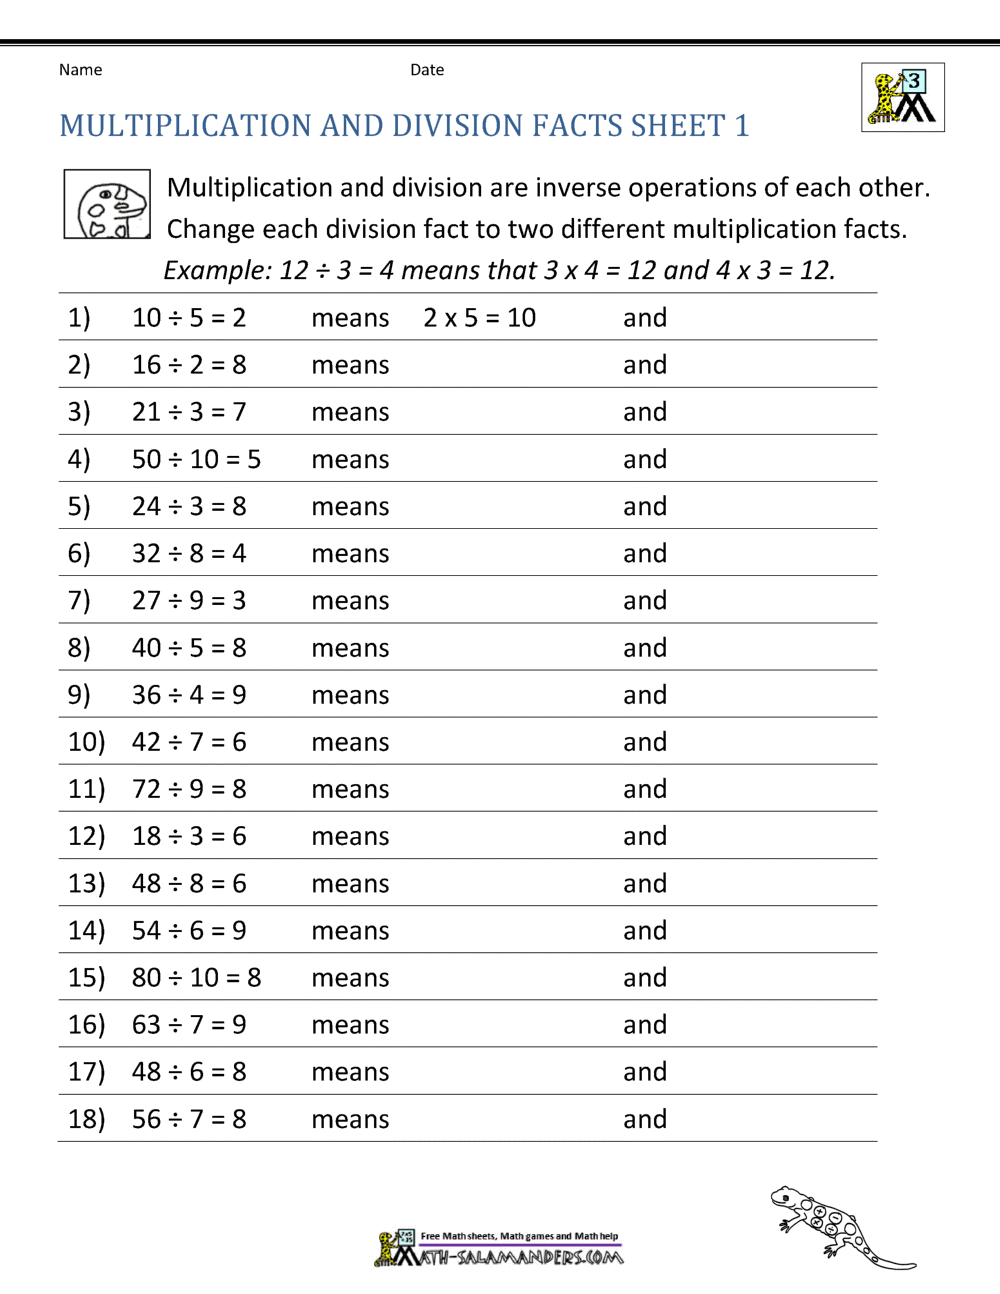 Multiplication Facts Worksheets - Understanding Multiplication to 10x10